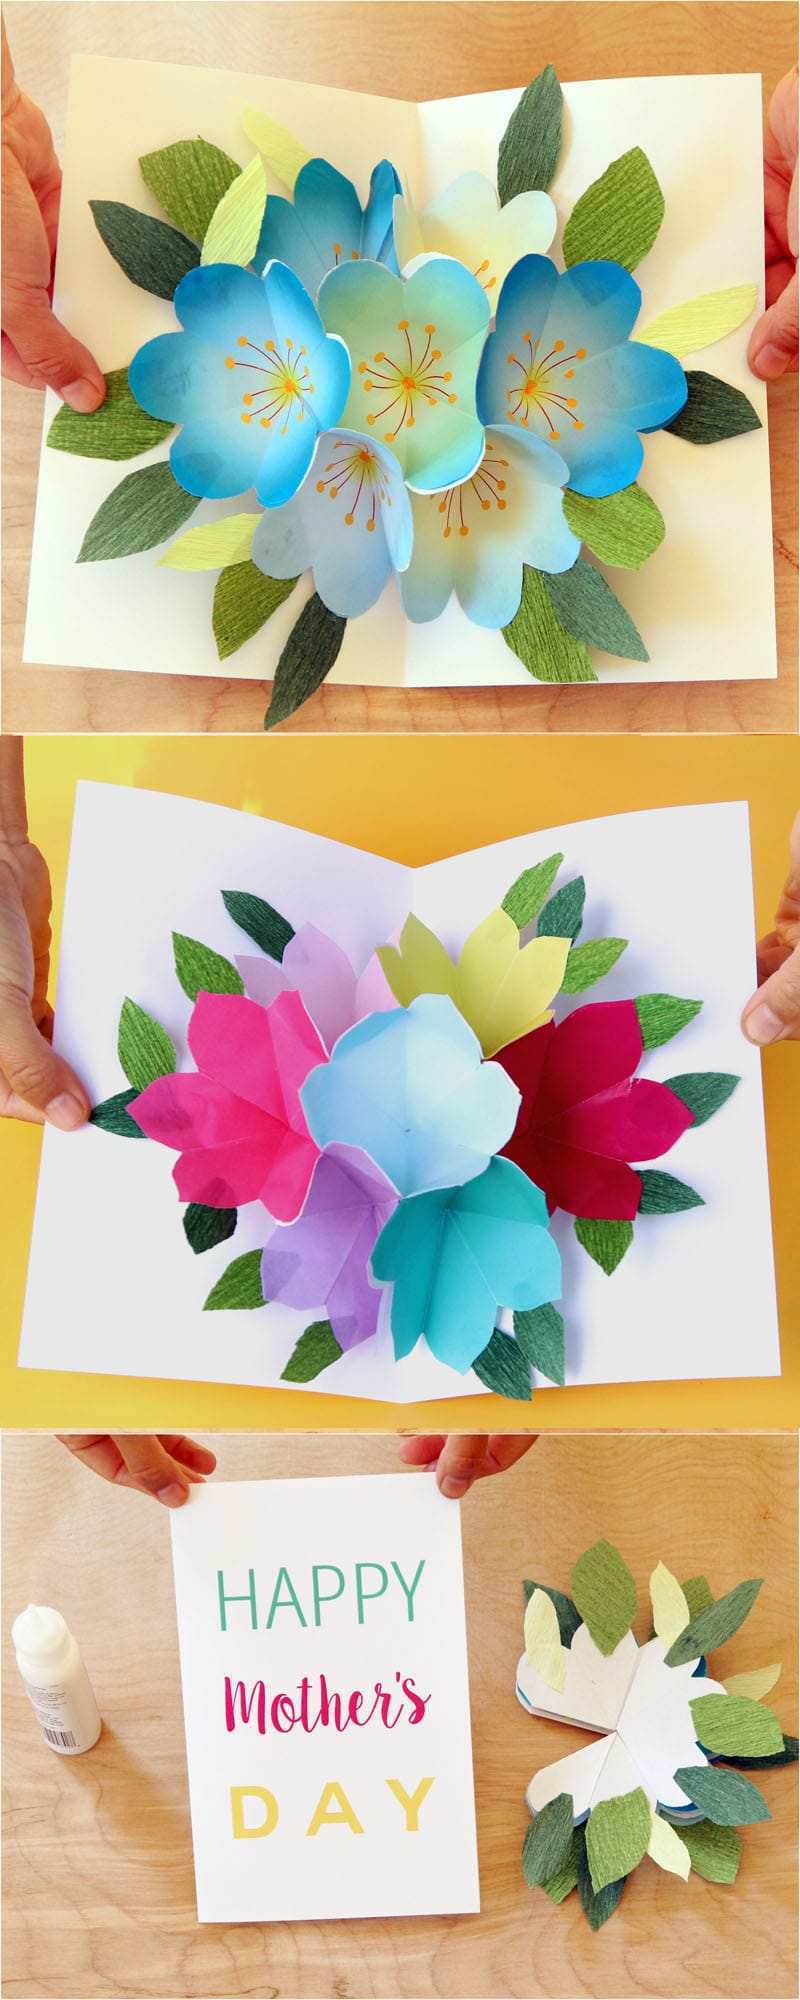 96 How To Create Mothers Day Pop Up Card Template in Photoshop with Mothers Day Pop Up Card Template